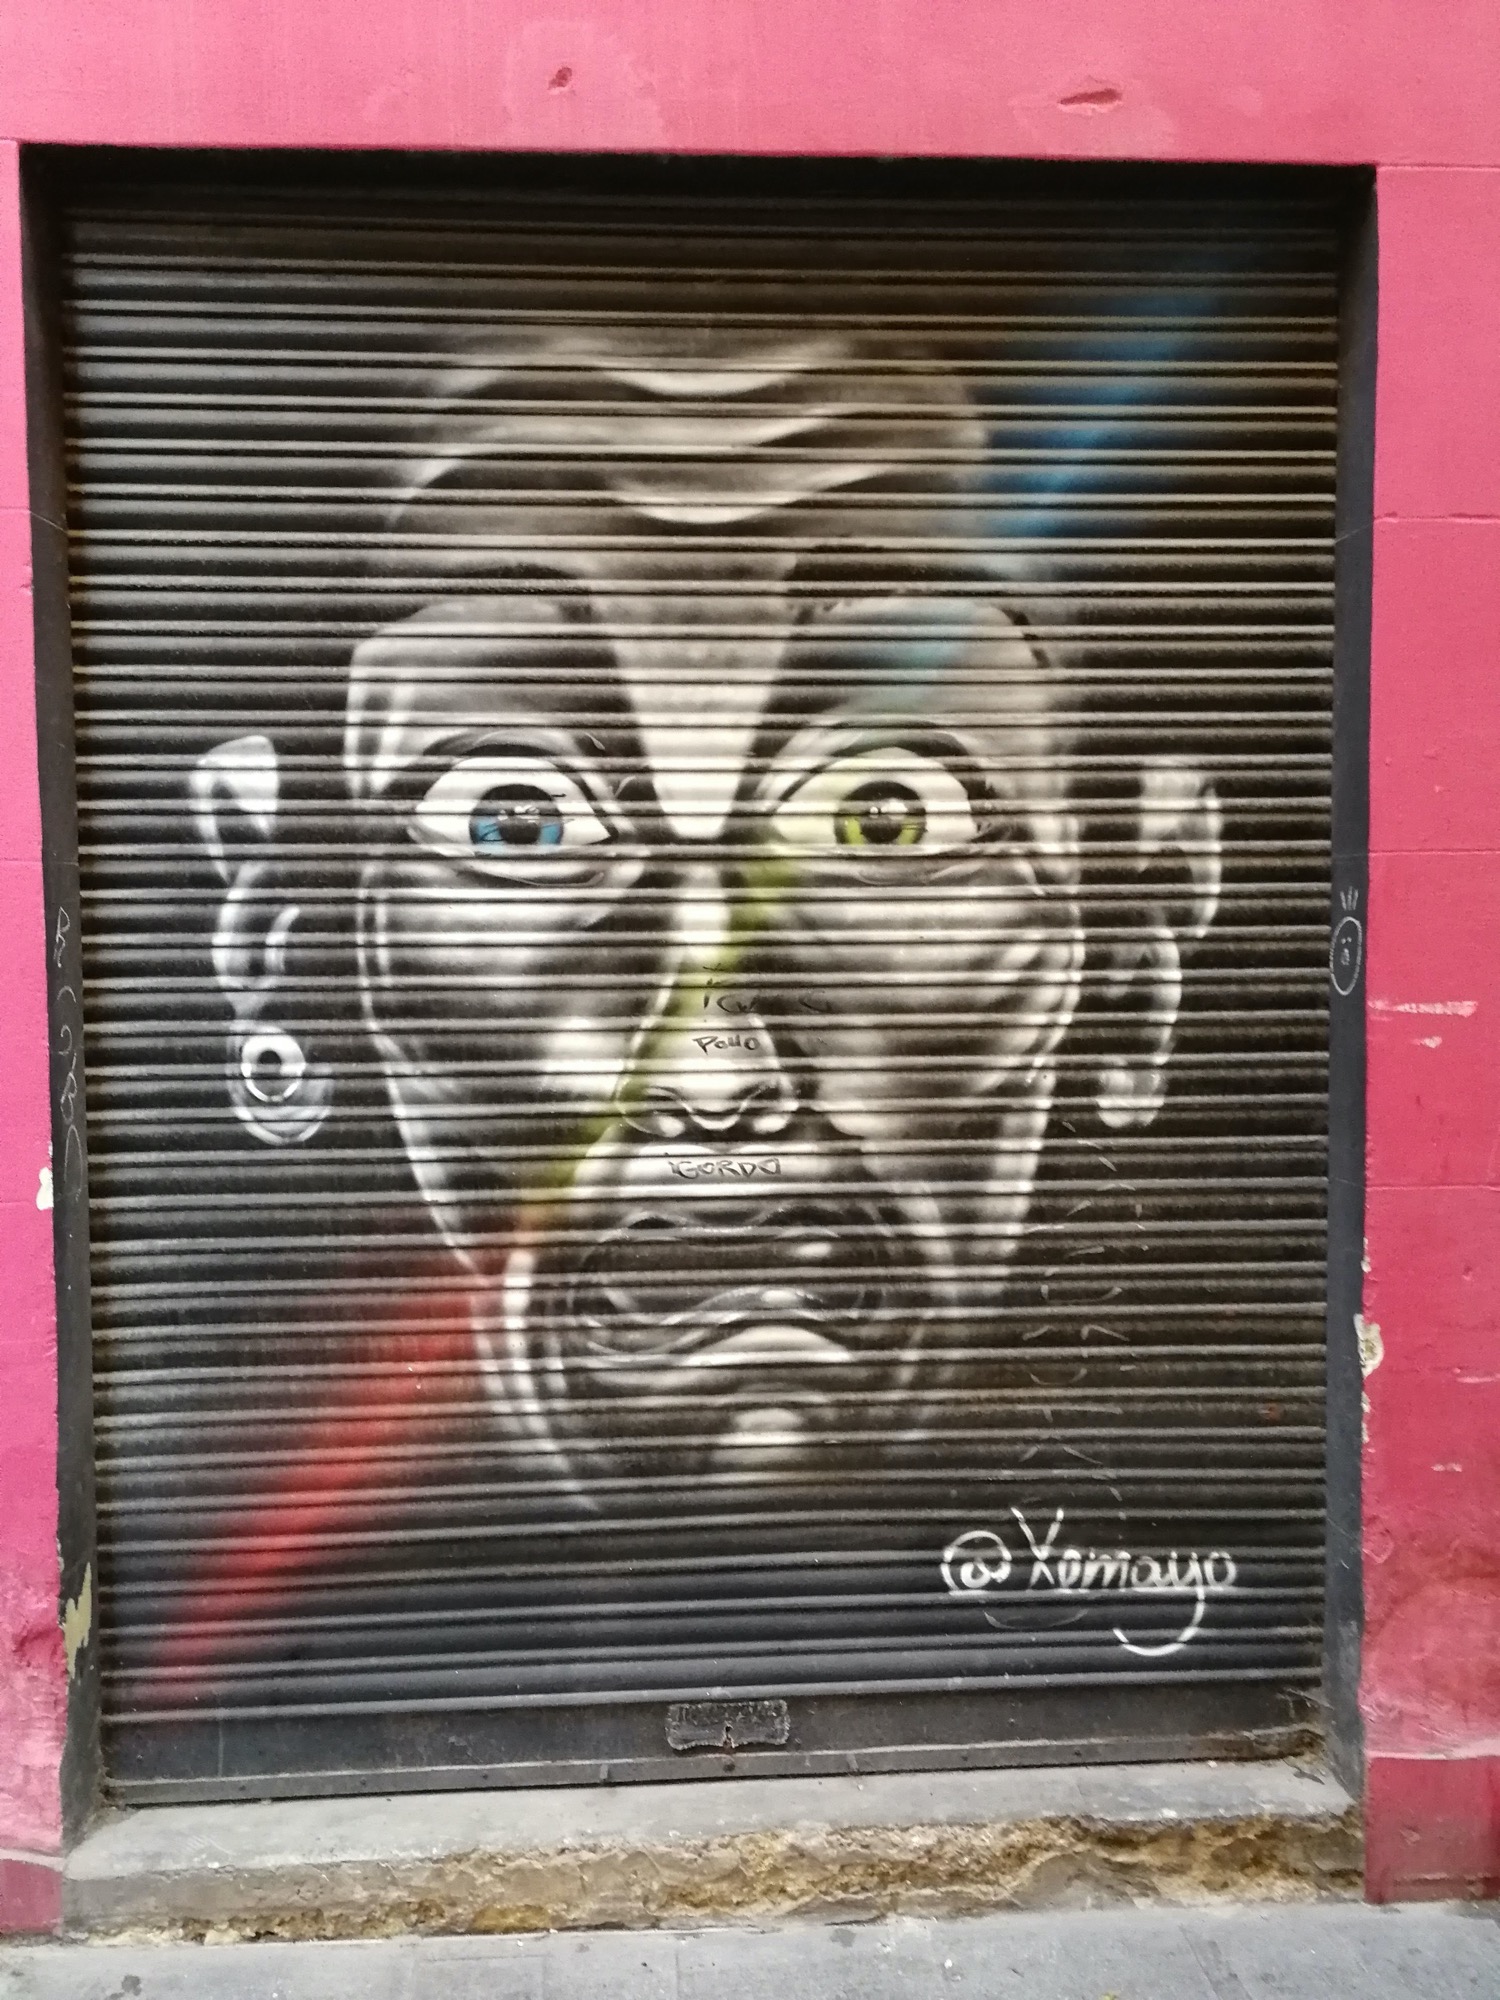 Graffiti 3758  by the artist Xemayo captured by Rabot in València Spain